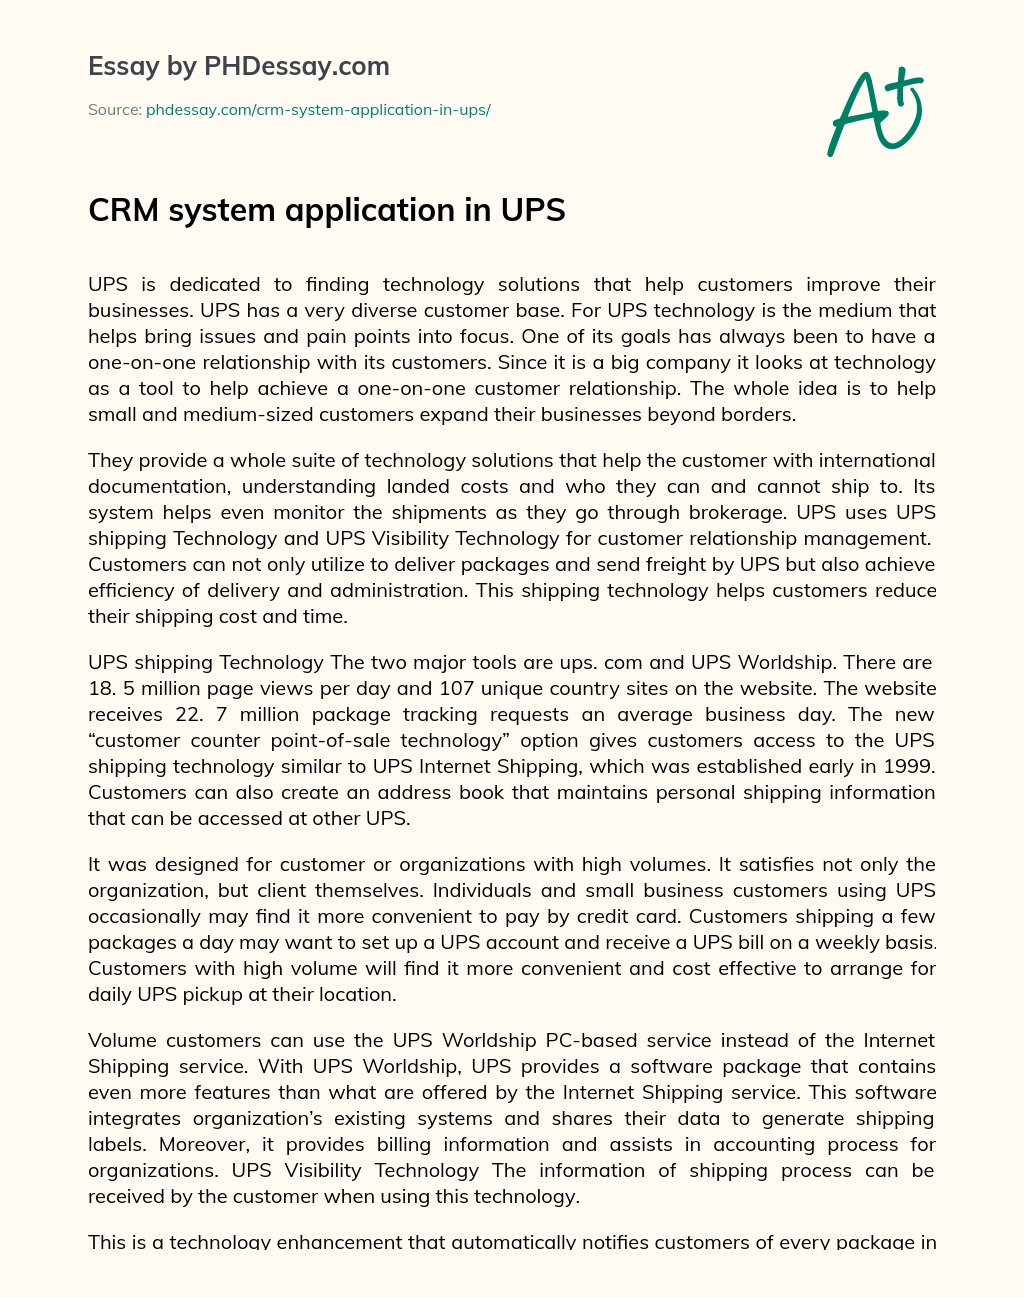 CRM system application in UPS essay